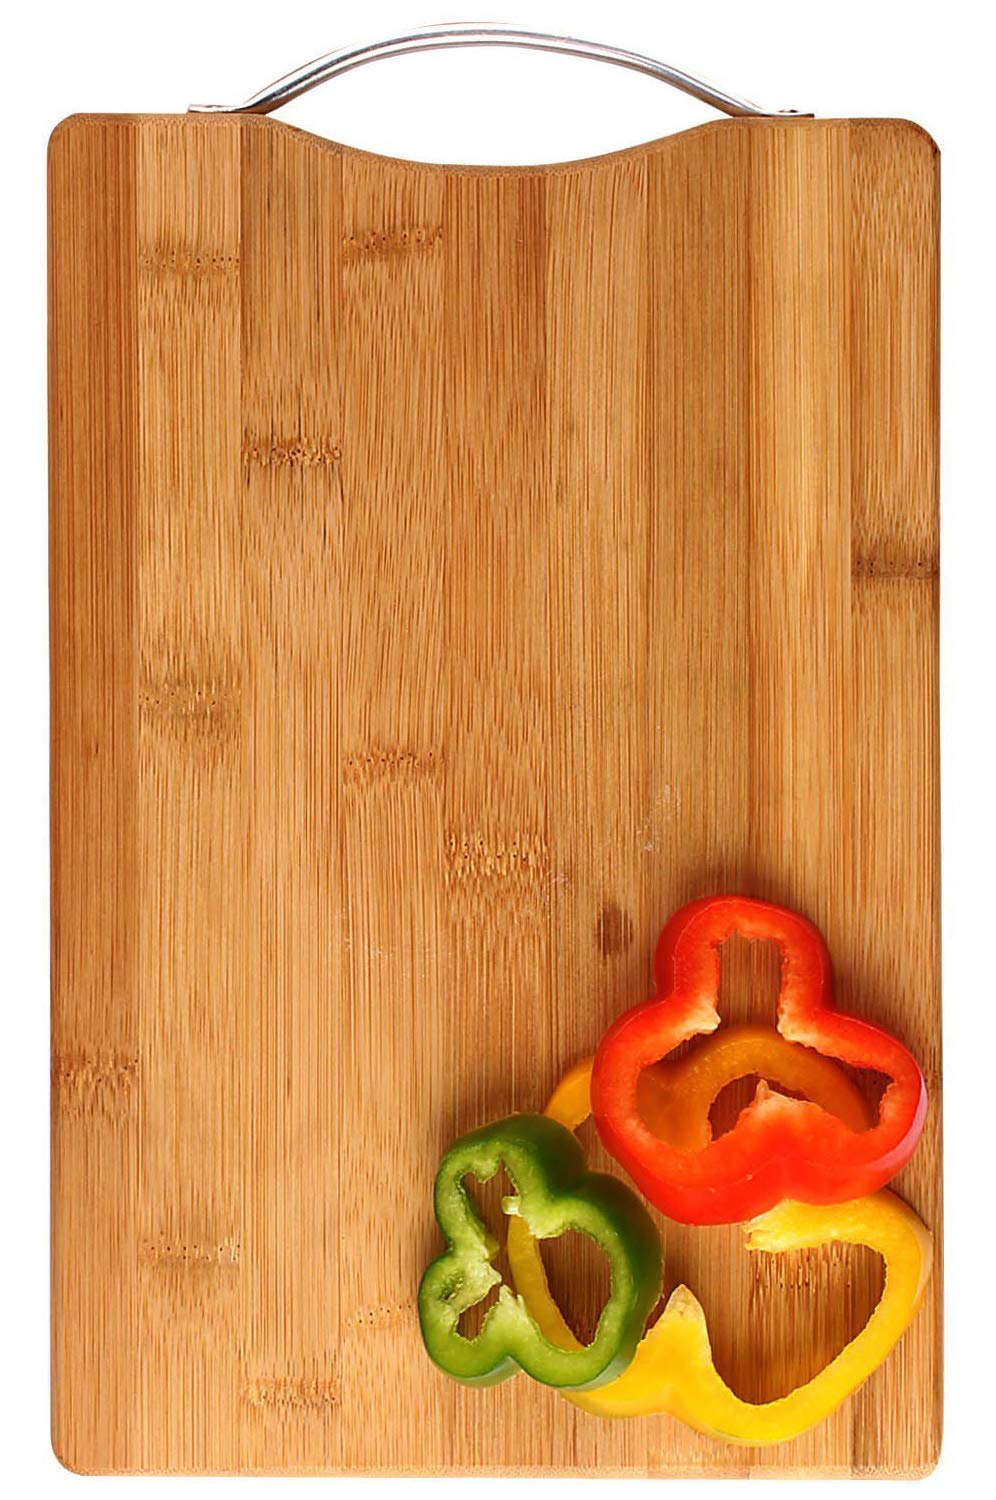 Natural Wood Chopping Board Cutting Board for Kitchen Vegetables, Fruits & Cheese, BPA Free, Eco-Friendly with Steel Handle Dime Store